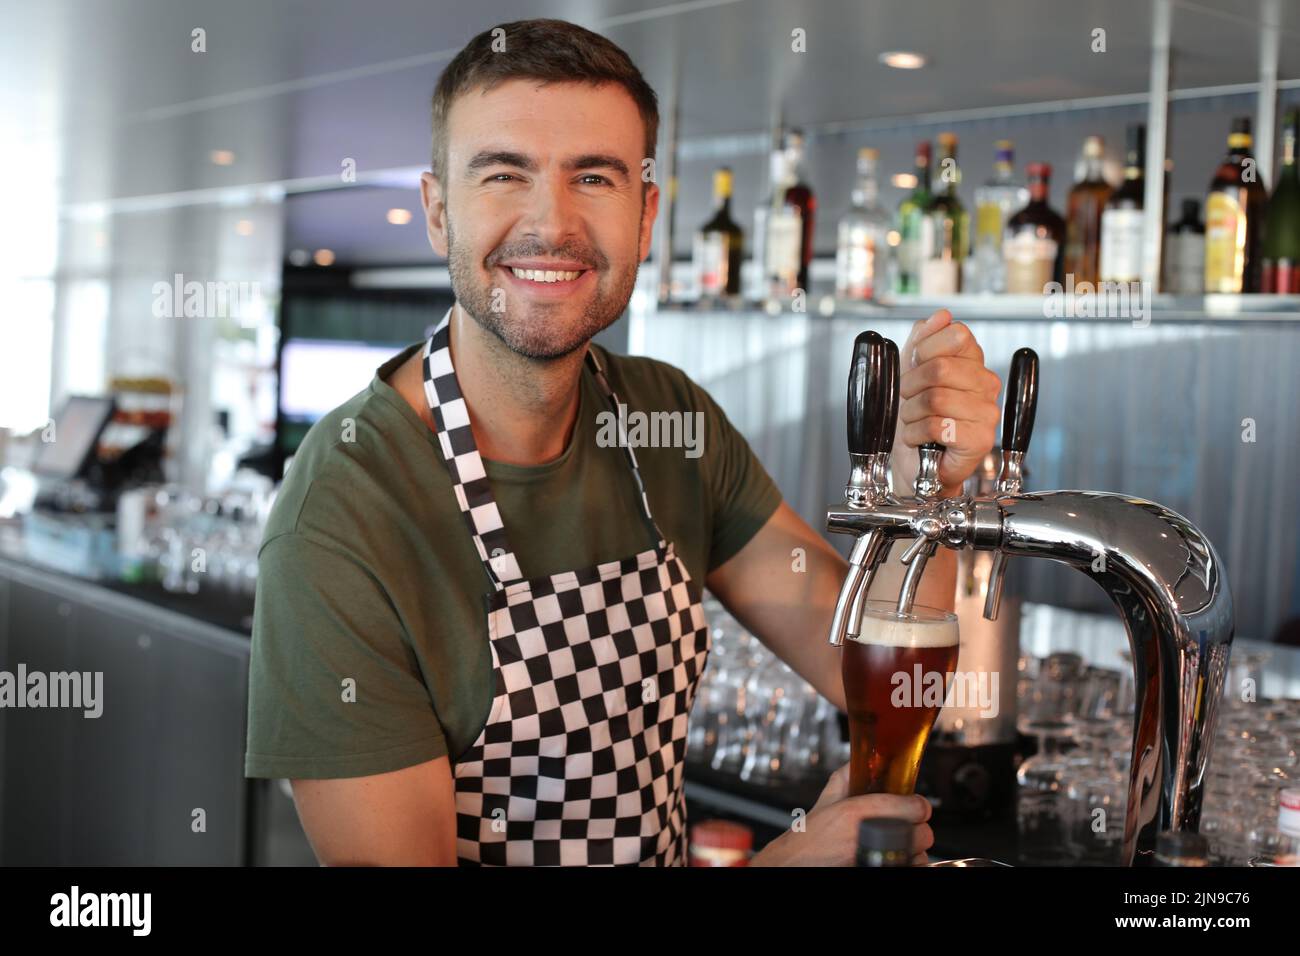 Bartender serving a refreshing looking beer Stock Photo